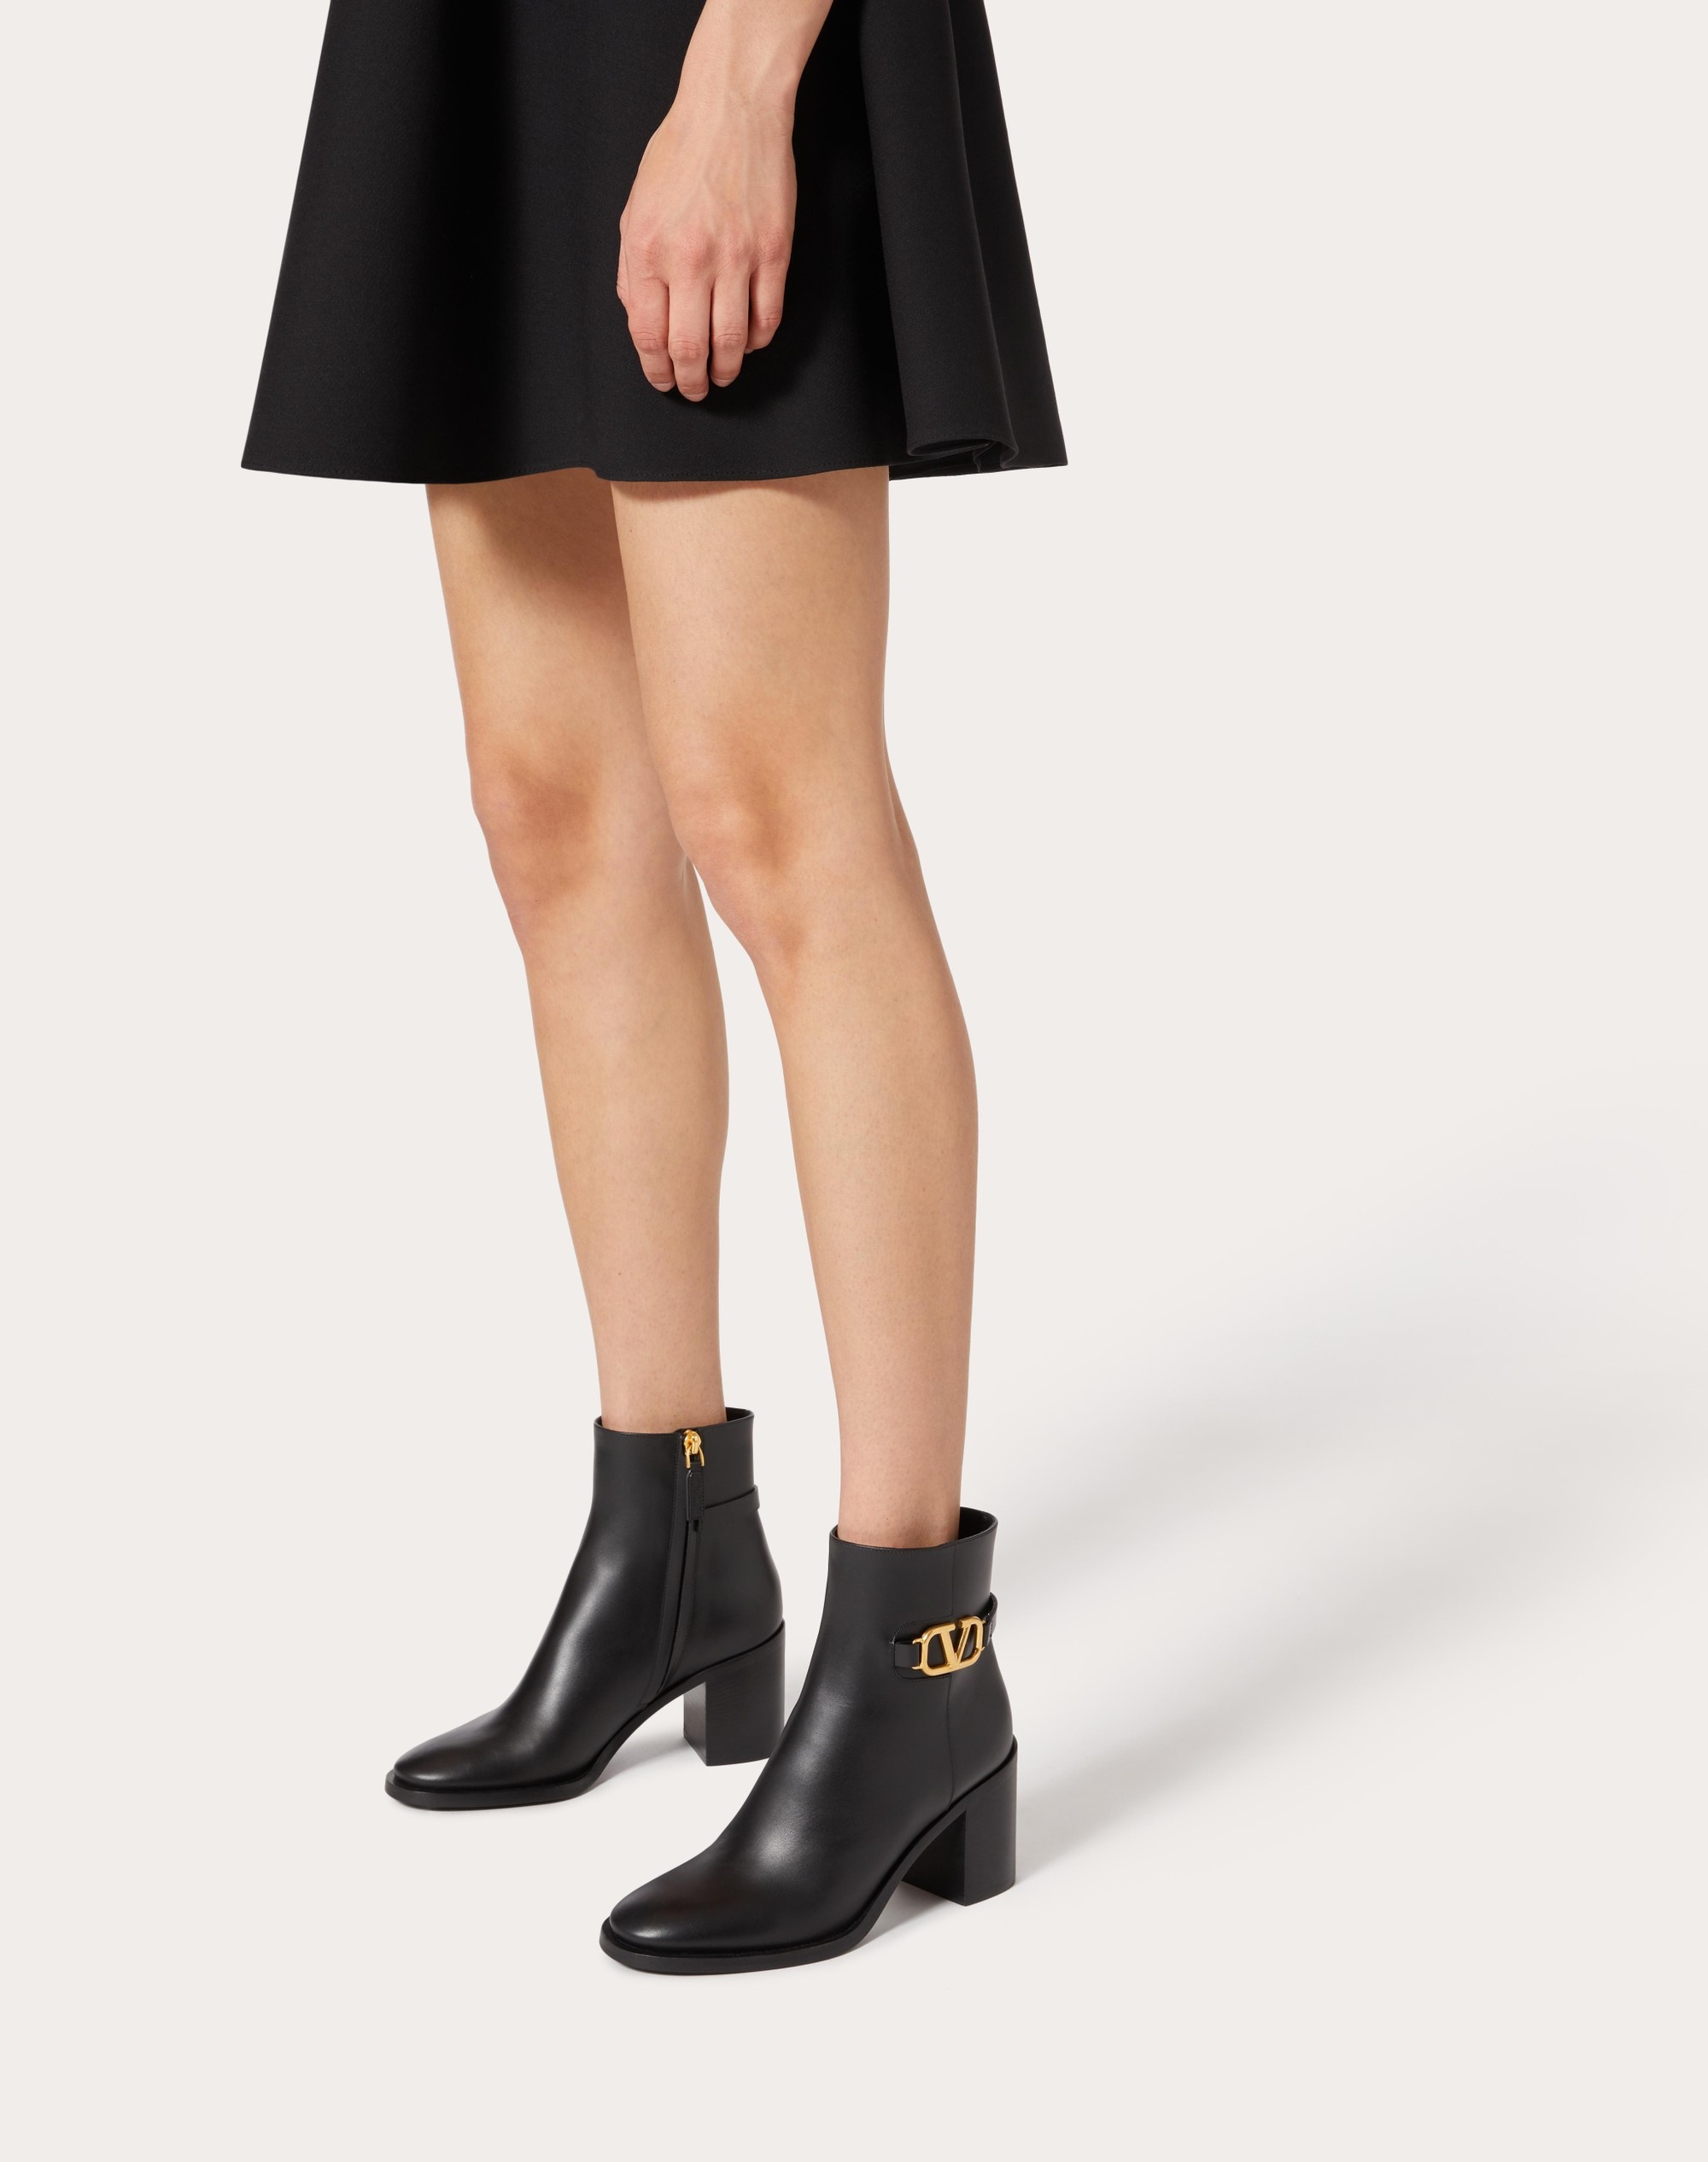 VLOGO SIGNATURE CALFSKIN ANKLE BOOT 75MM - 6